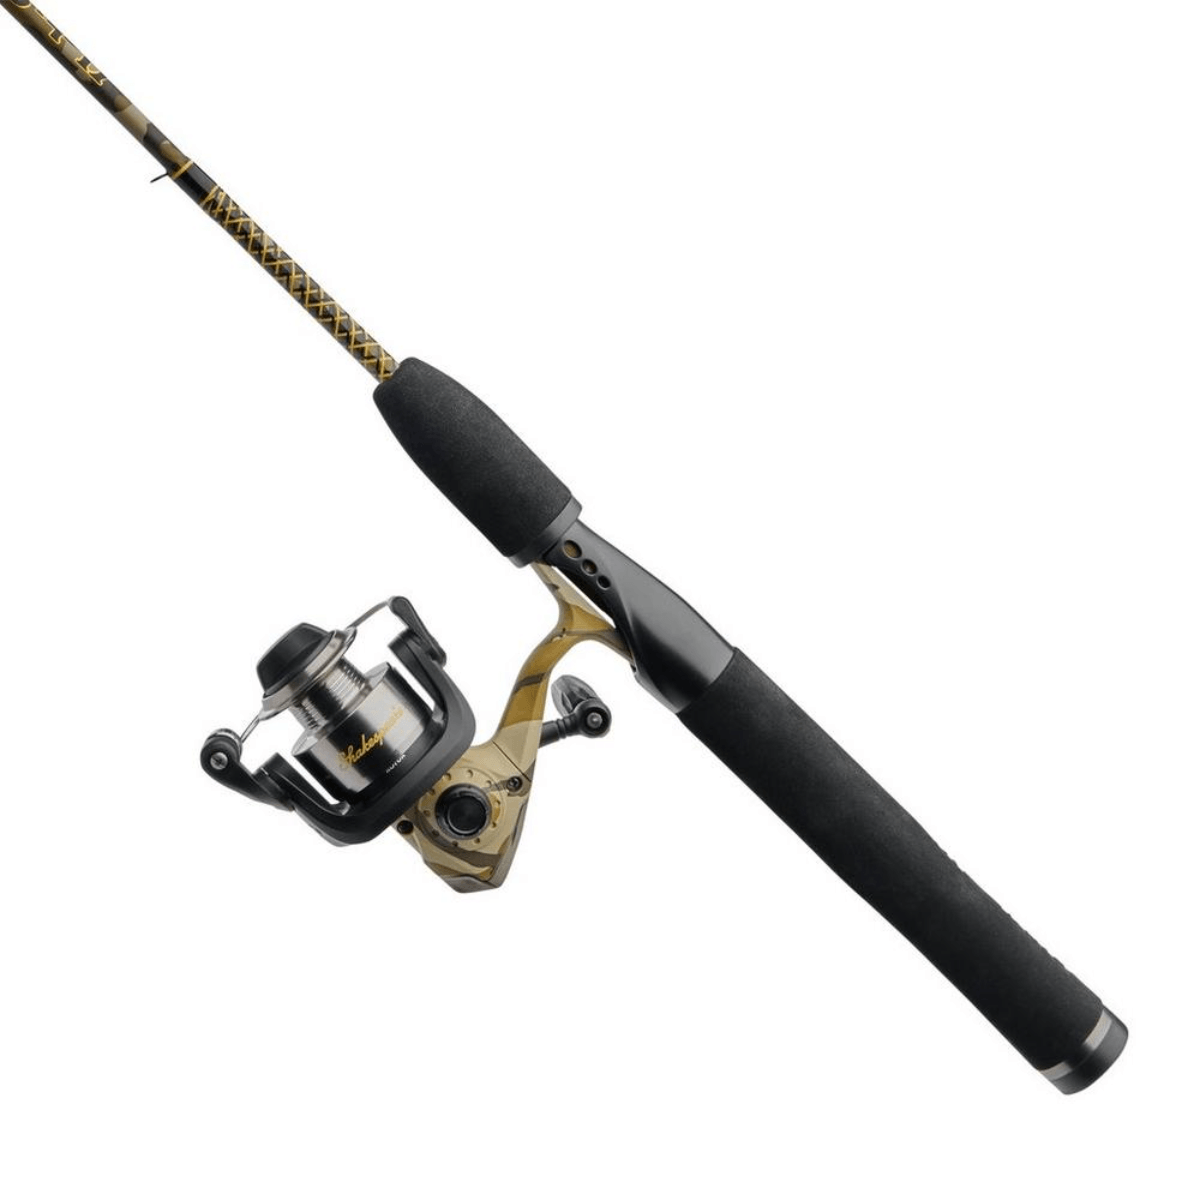 Shakespeare Ugly Stik Lady Camo Spinning Combo Rod - Als.com